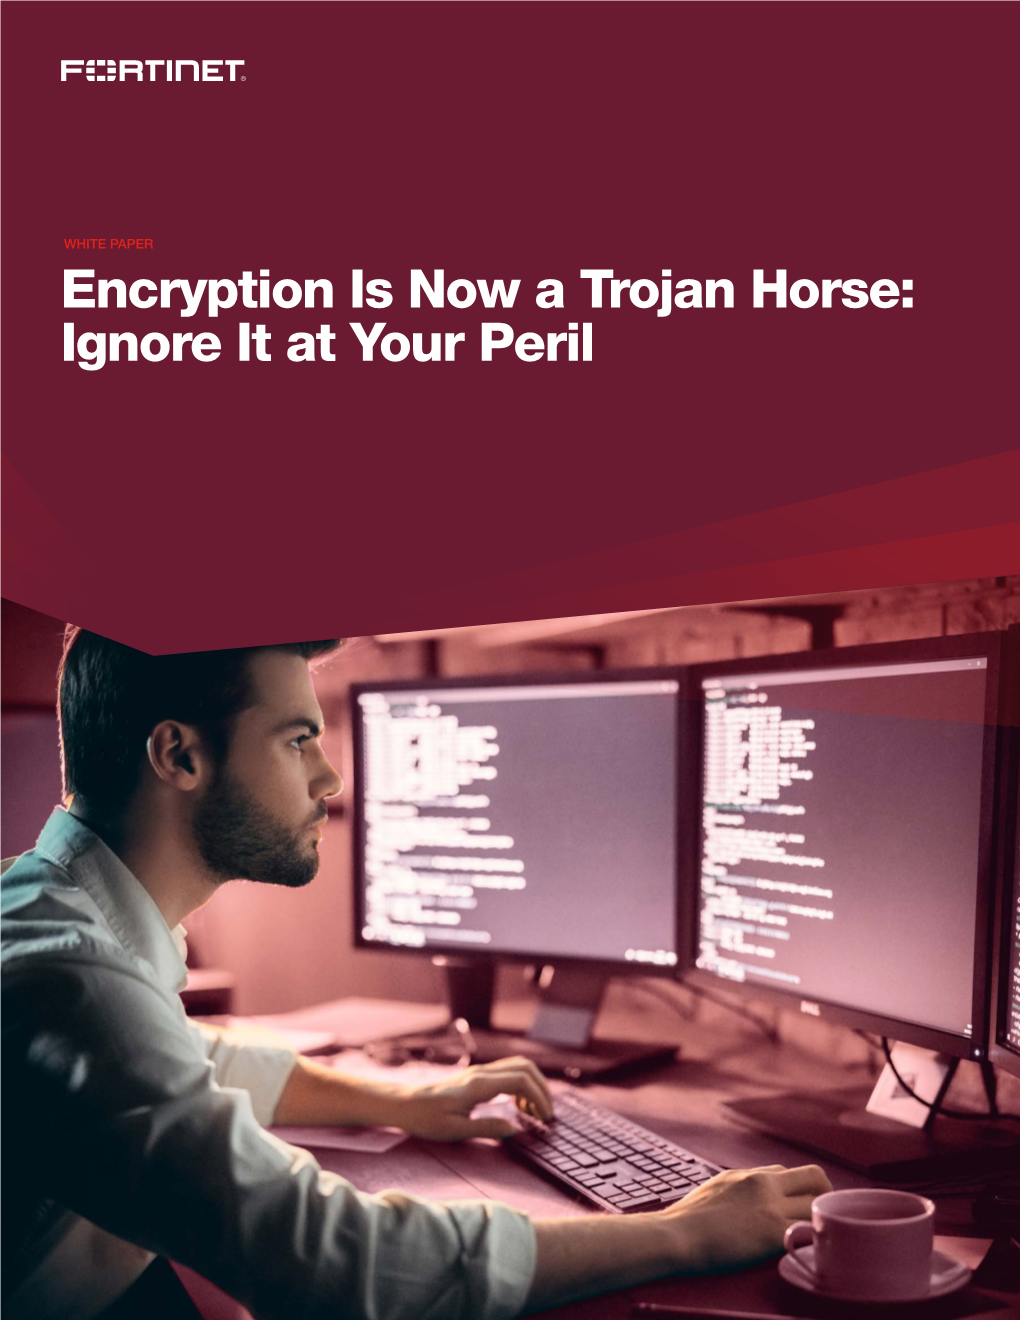 Encryption Is Now a Trojan Horse: Ignore It at Your Peril Executive Summary the Game of Leapfrog Between Hackers and Data Security Professionals Continues